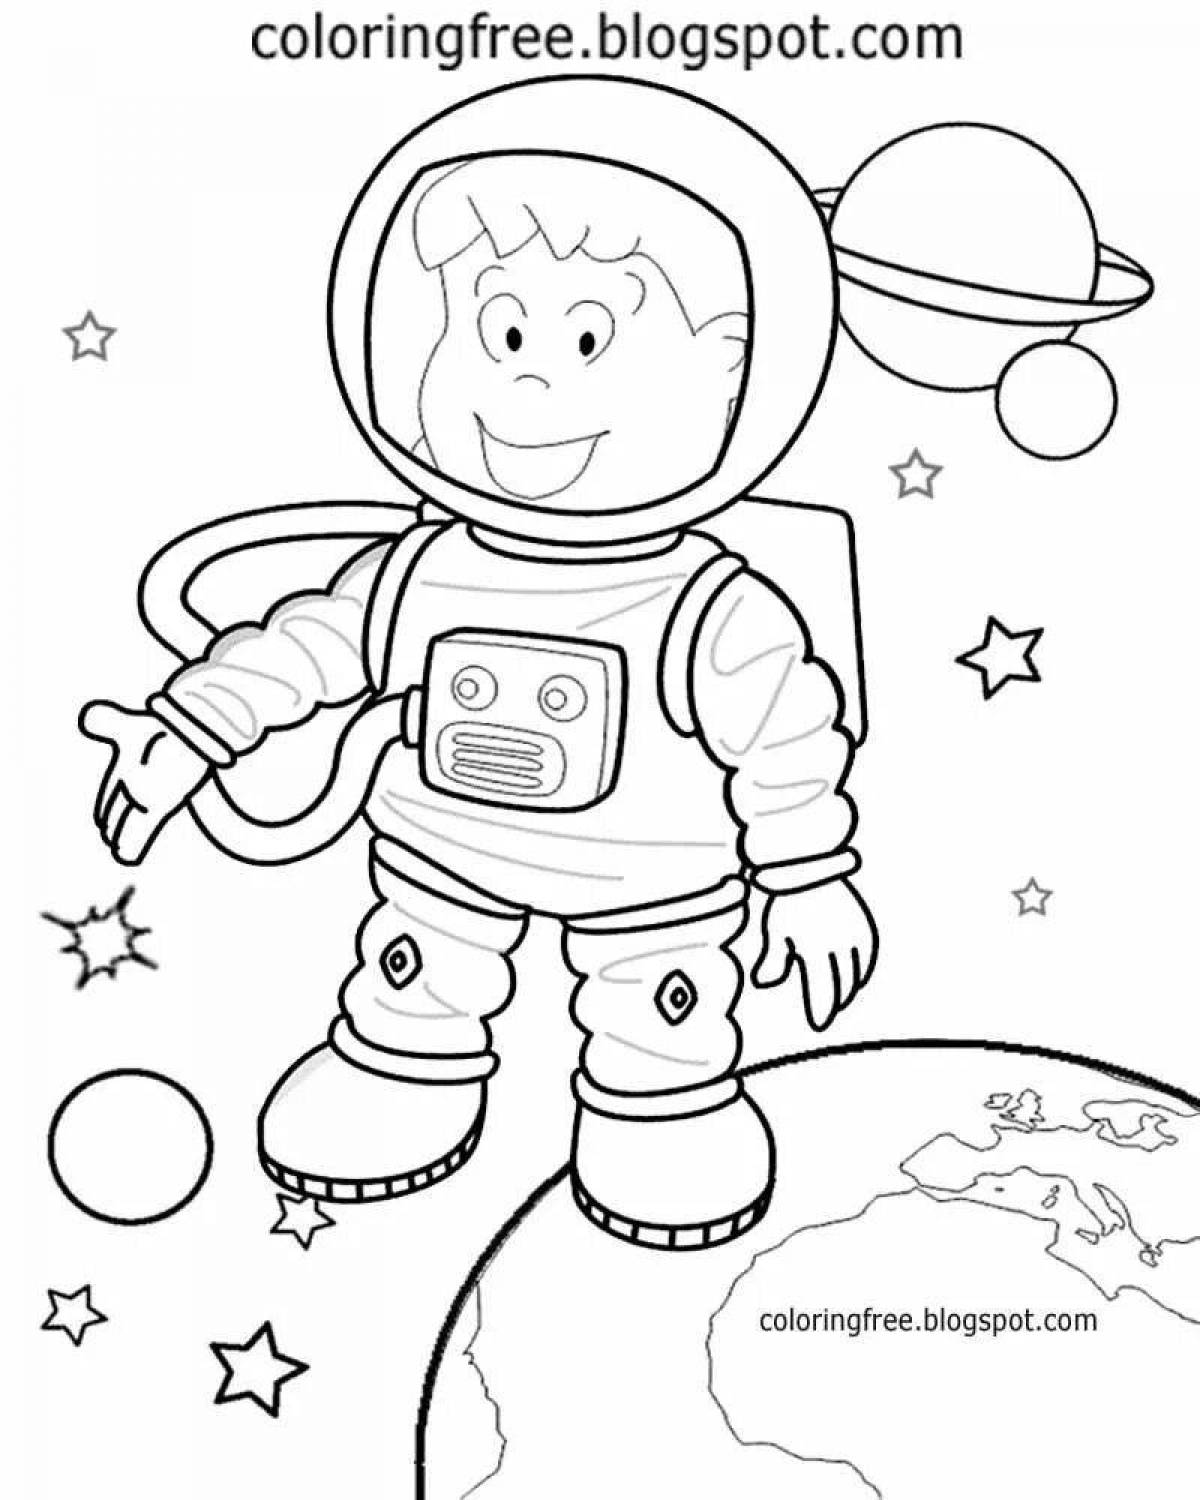 Awesome astronaut coloring pages for kids